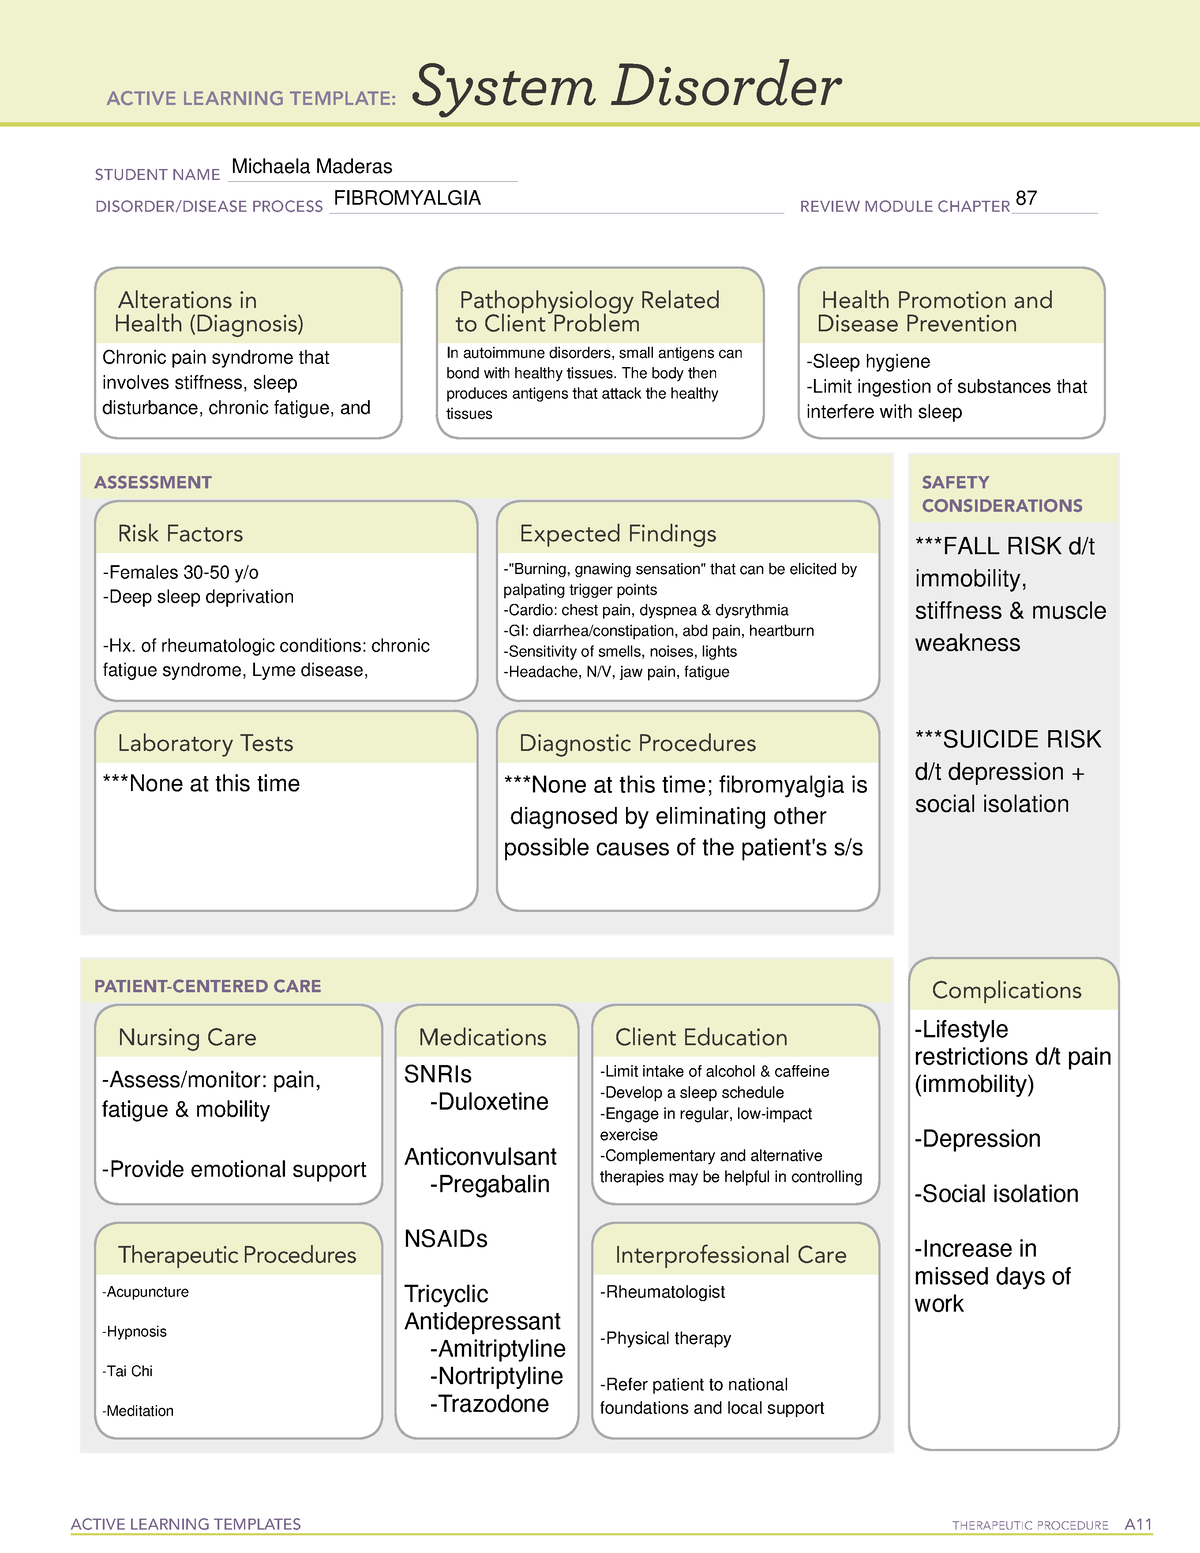 Fibromyalgia ATI active learning template Musculoskeletal System